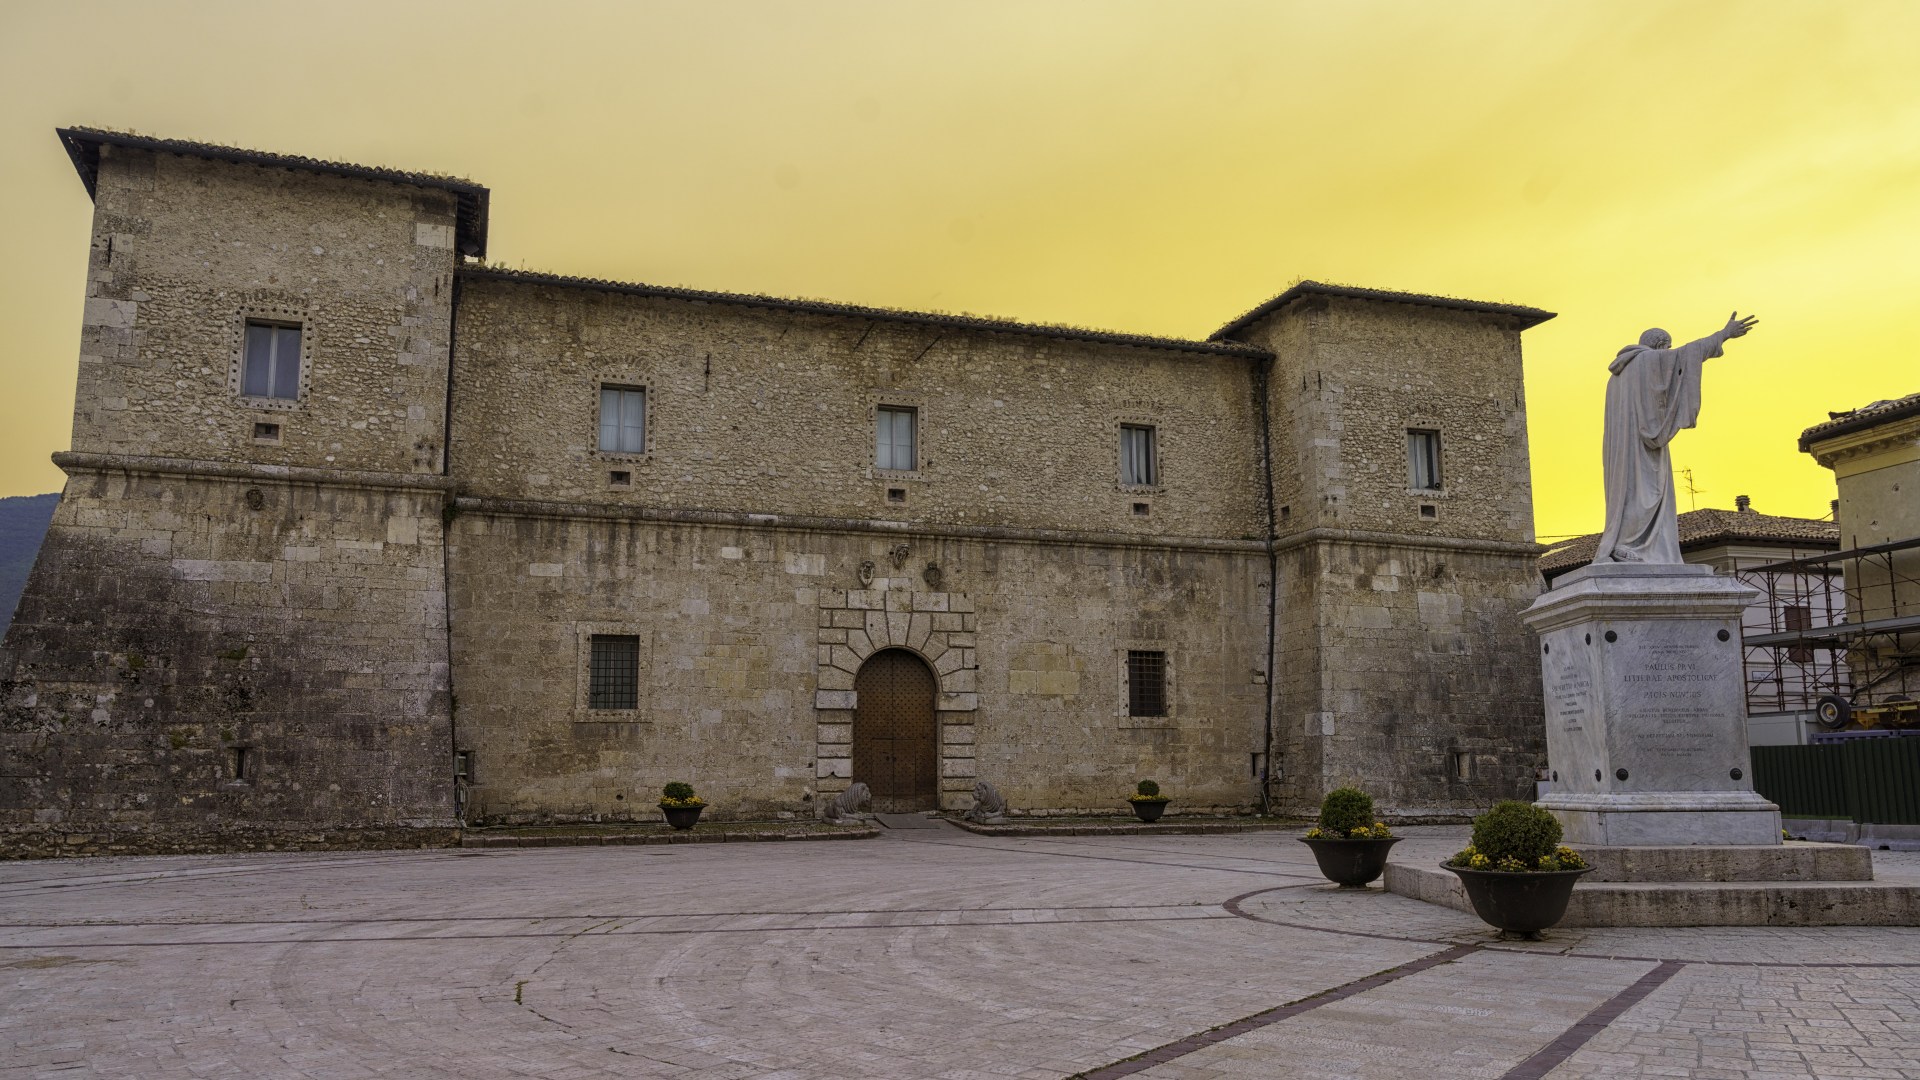 Norcia, Umbria, Italy: the castle known as Castellina